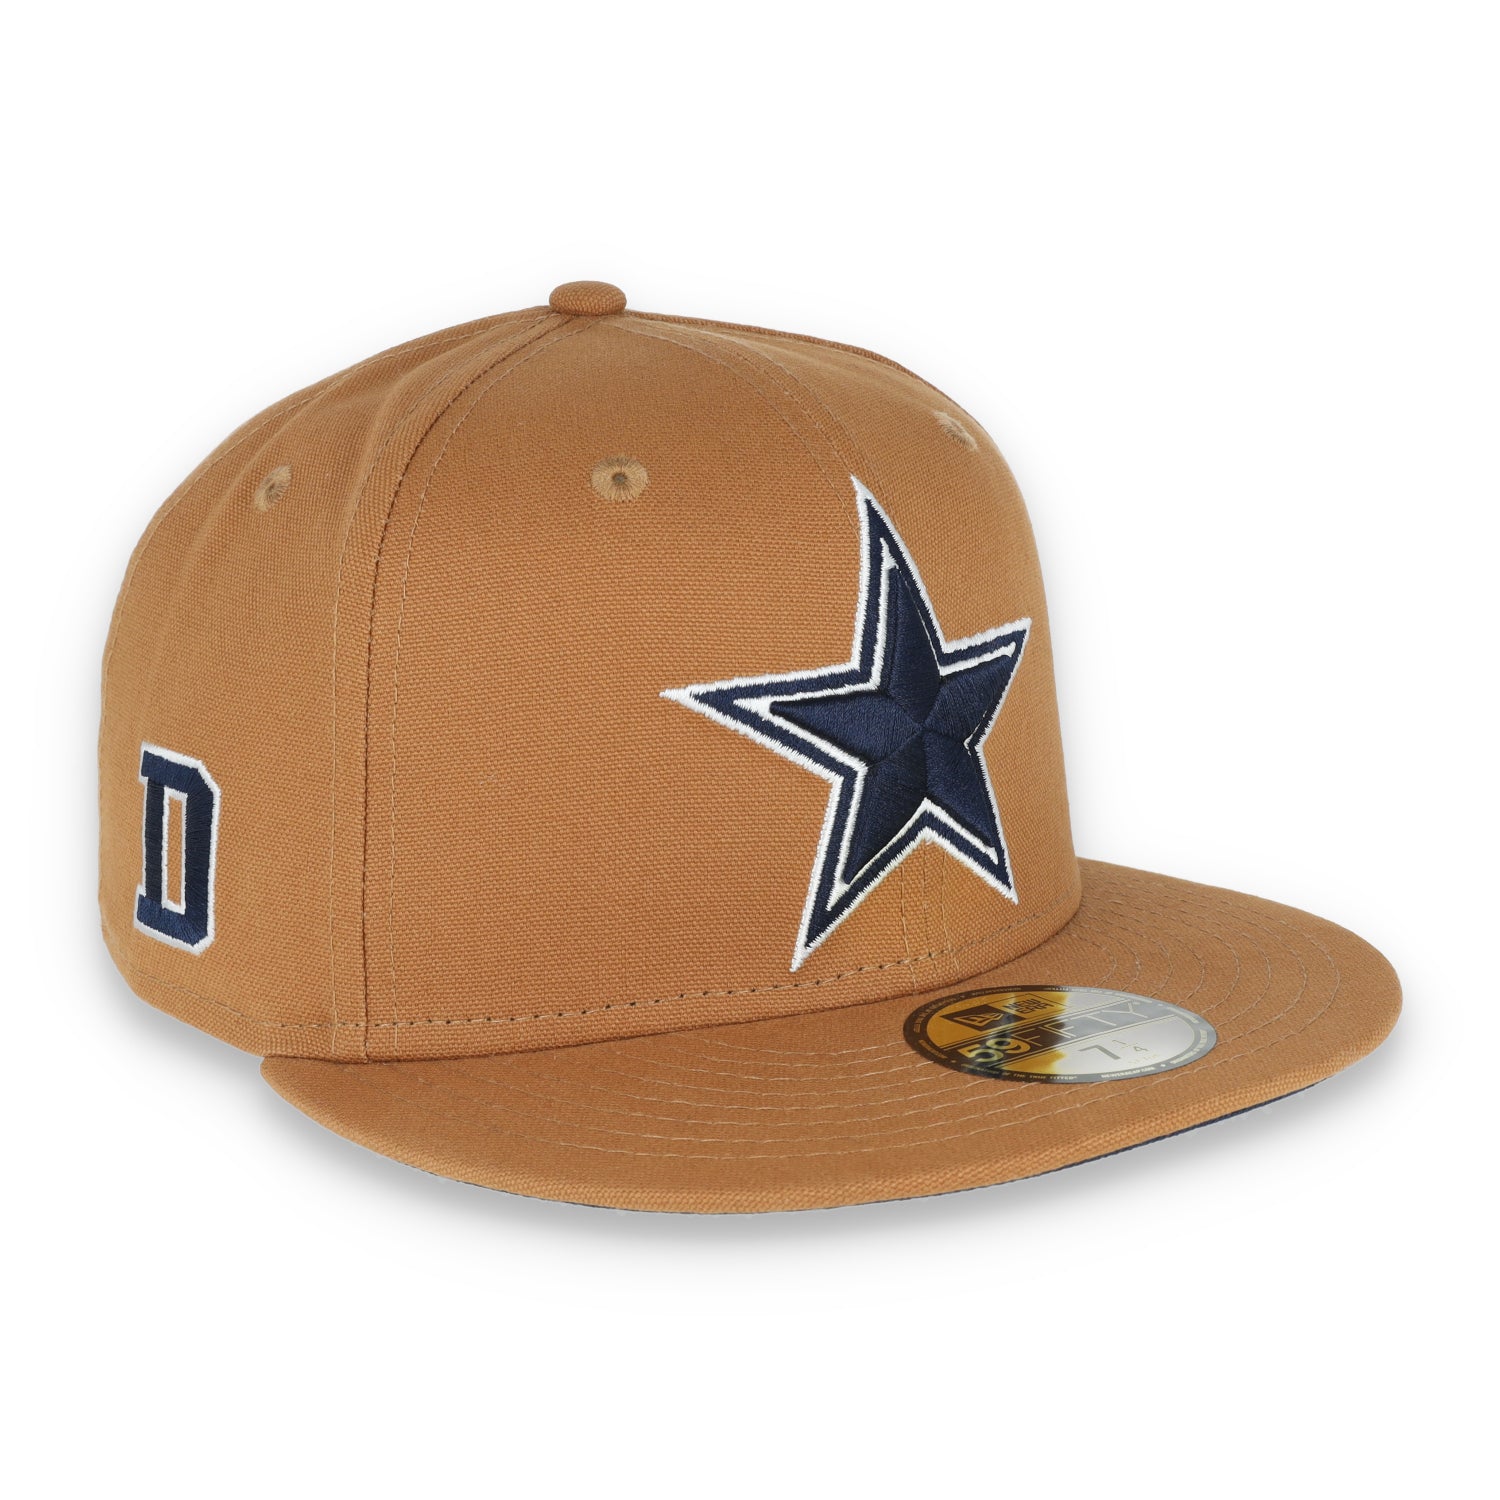 New Era Dallas Cowboys 59FIFTY Fitted Hat- Bronze/Navy